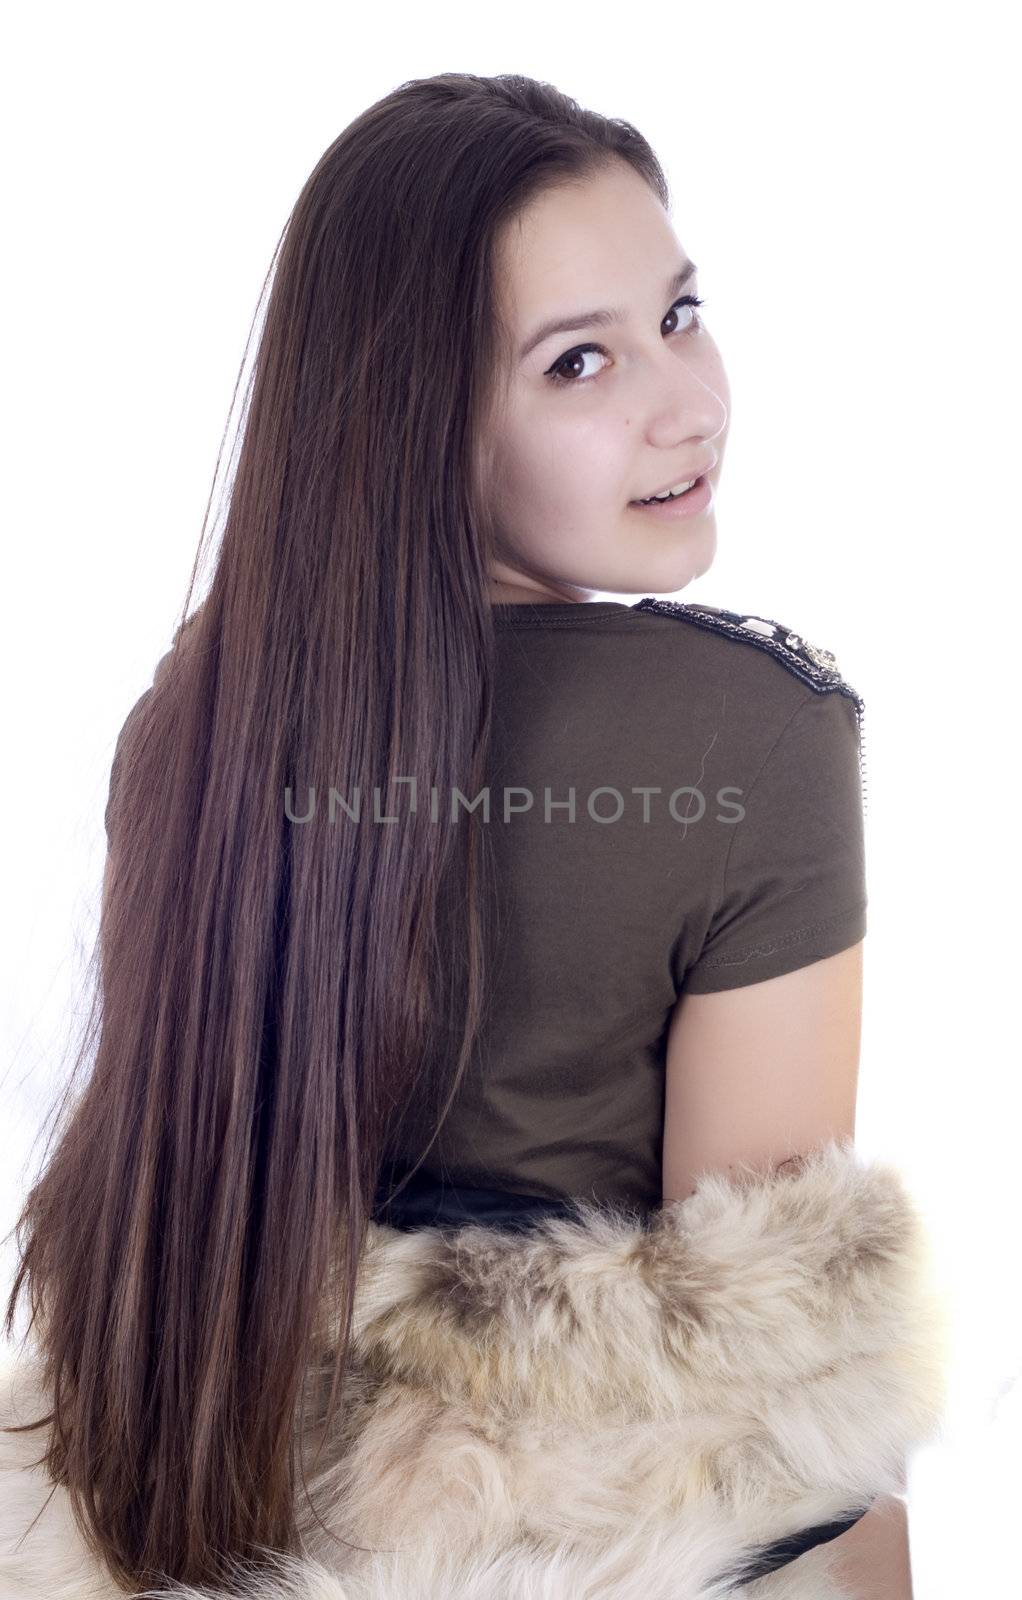 The young beautiful girl in a fur coat isolated on white
